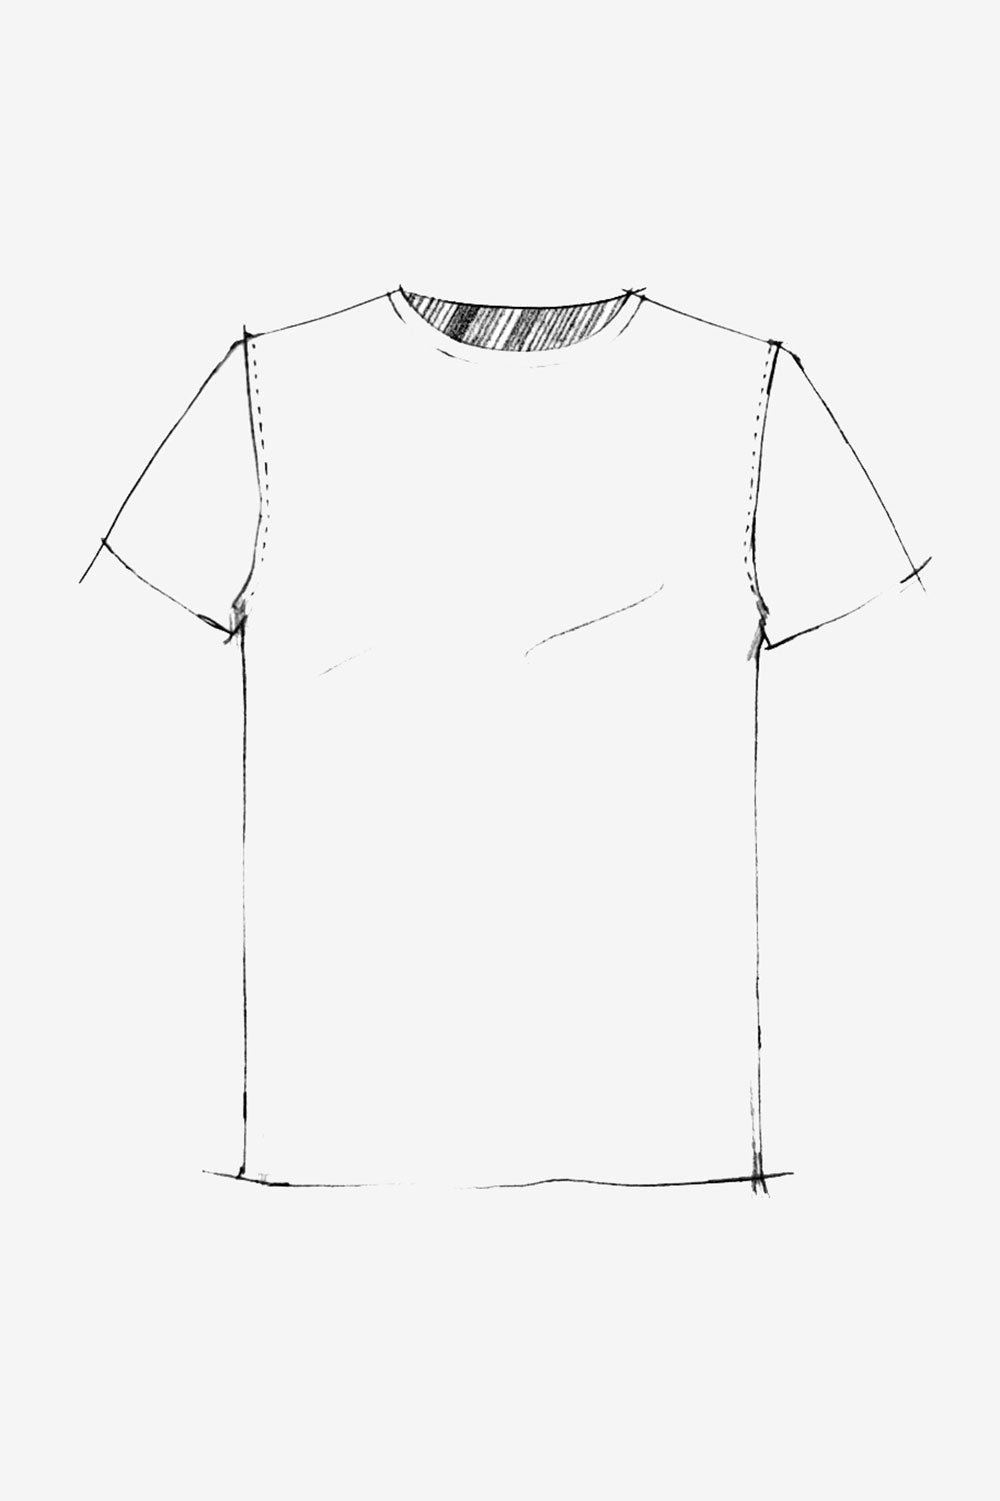 The School of Making The Unisex T-Shirt Top Pattern Unisex DIY Clothing Pattern for Hand-Sewn T-Shirt.